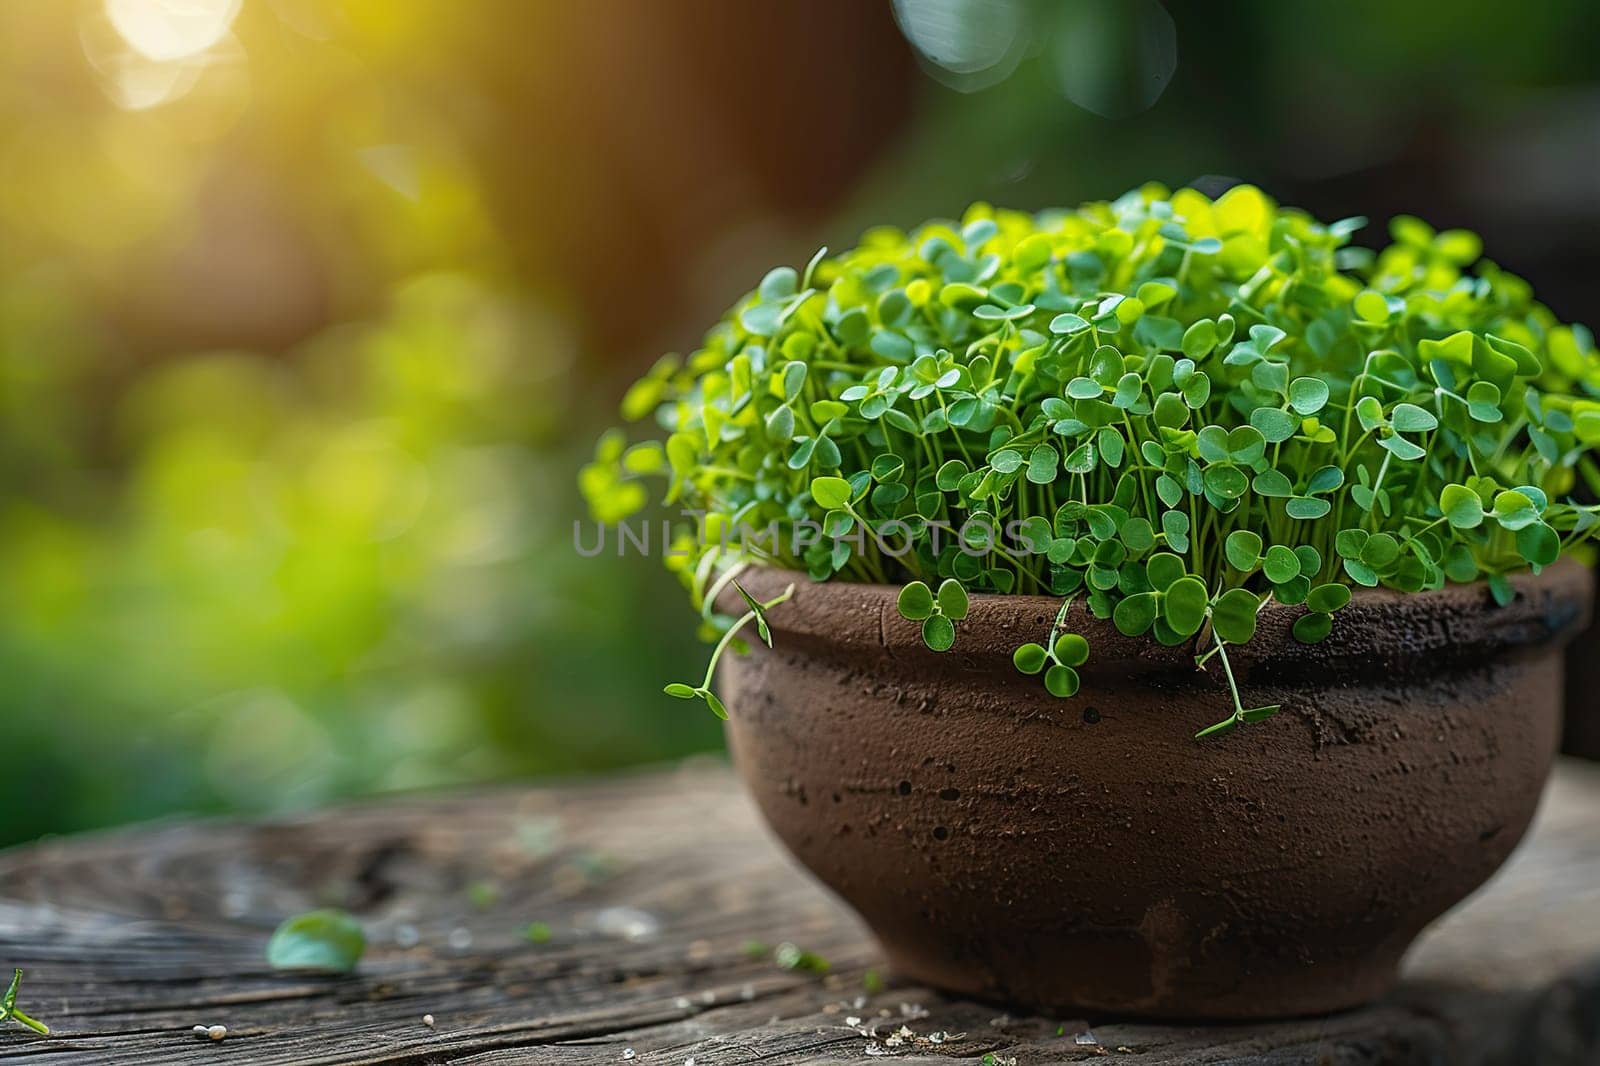 Lush fresh microgreens in a pot outdoors with a blurred natural background.